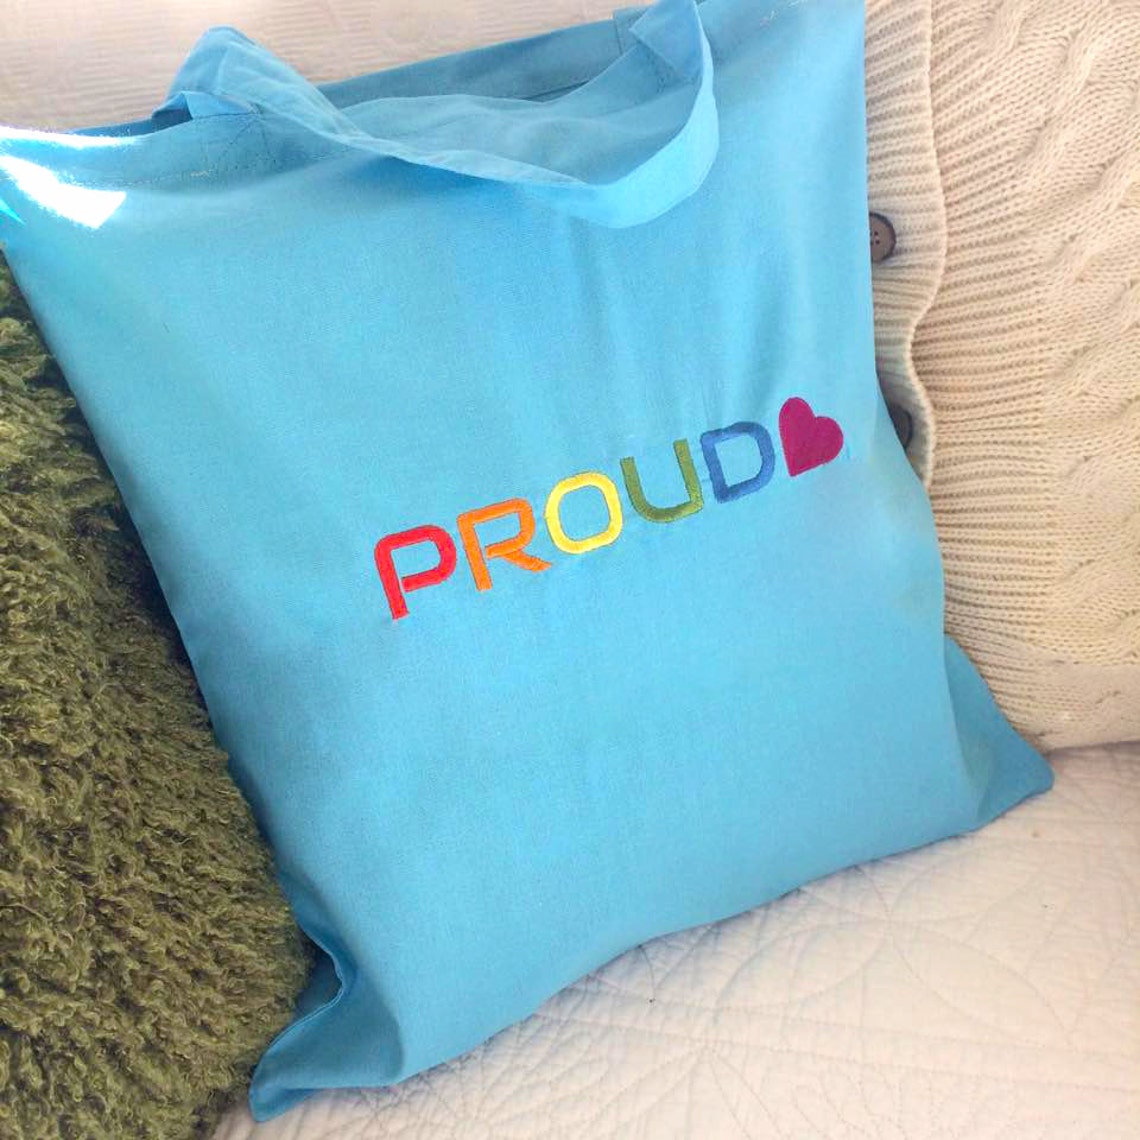 Proud LGBTQIA Embroidery Design File - Etsy